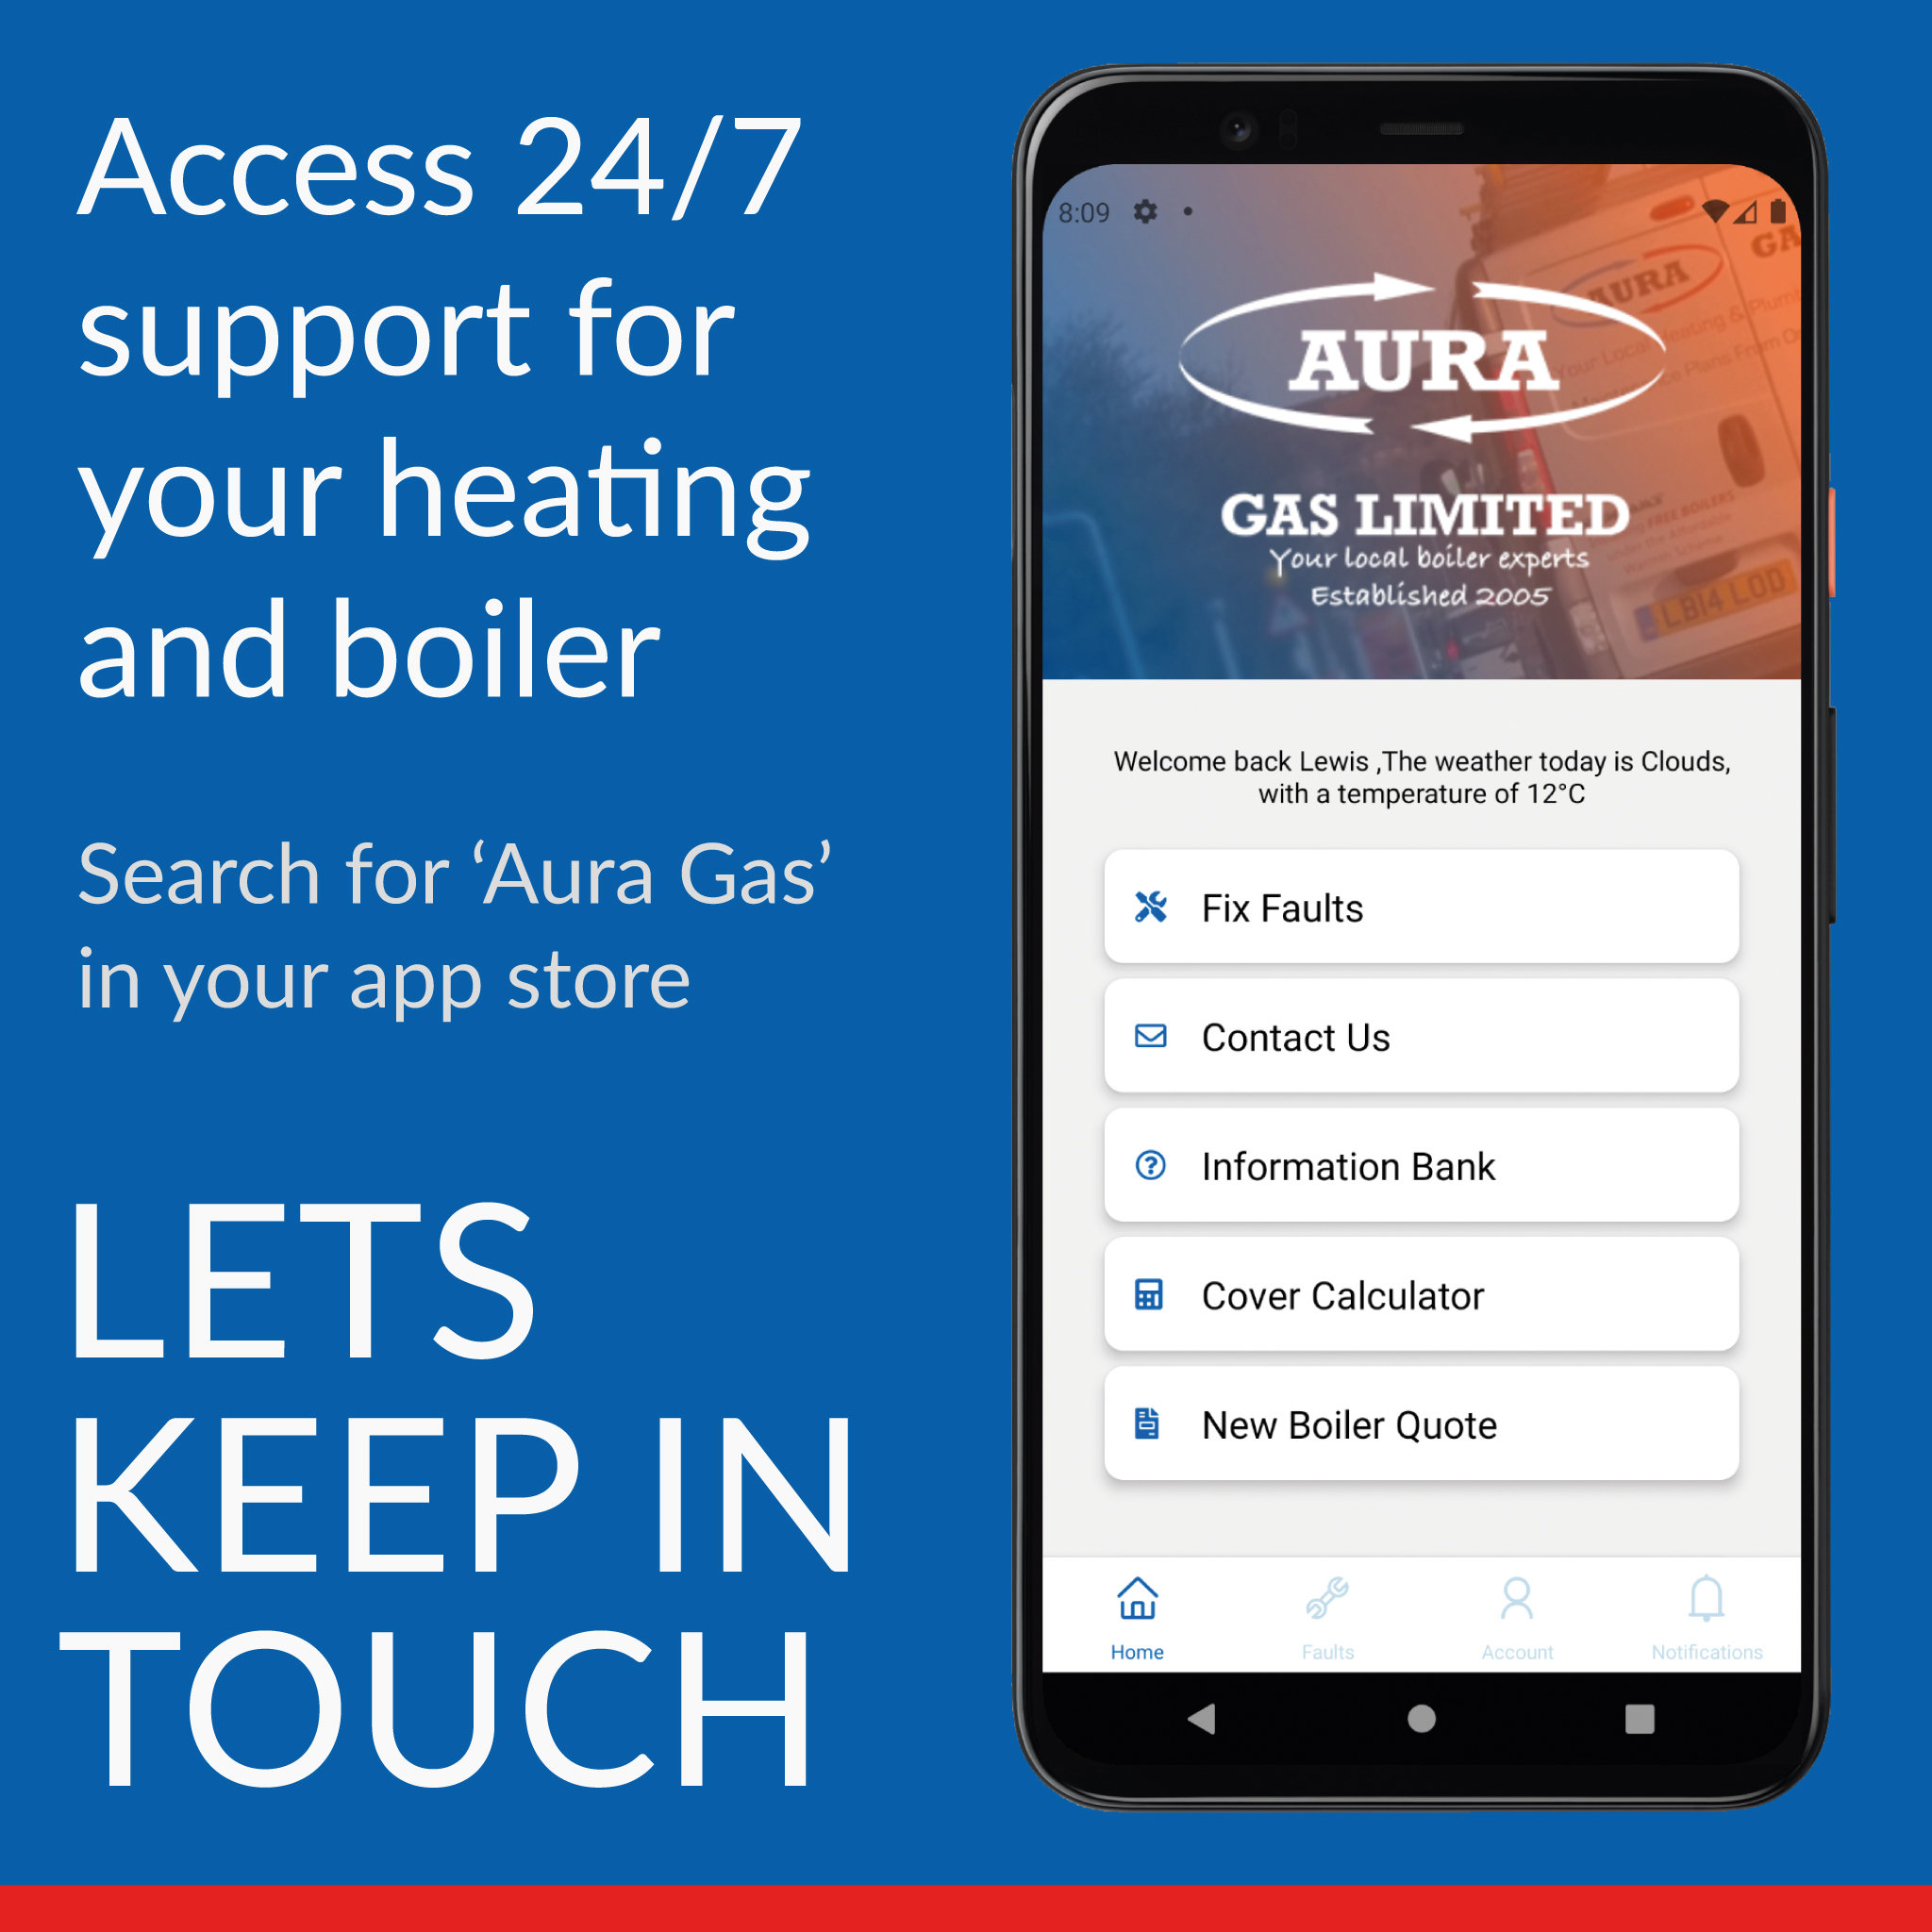 We’ve Launched the Aura Gas App!